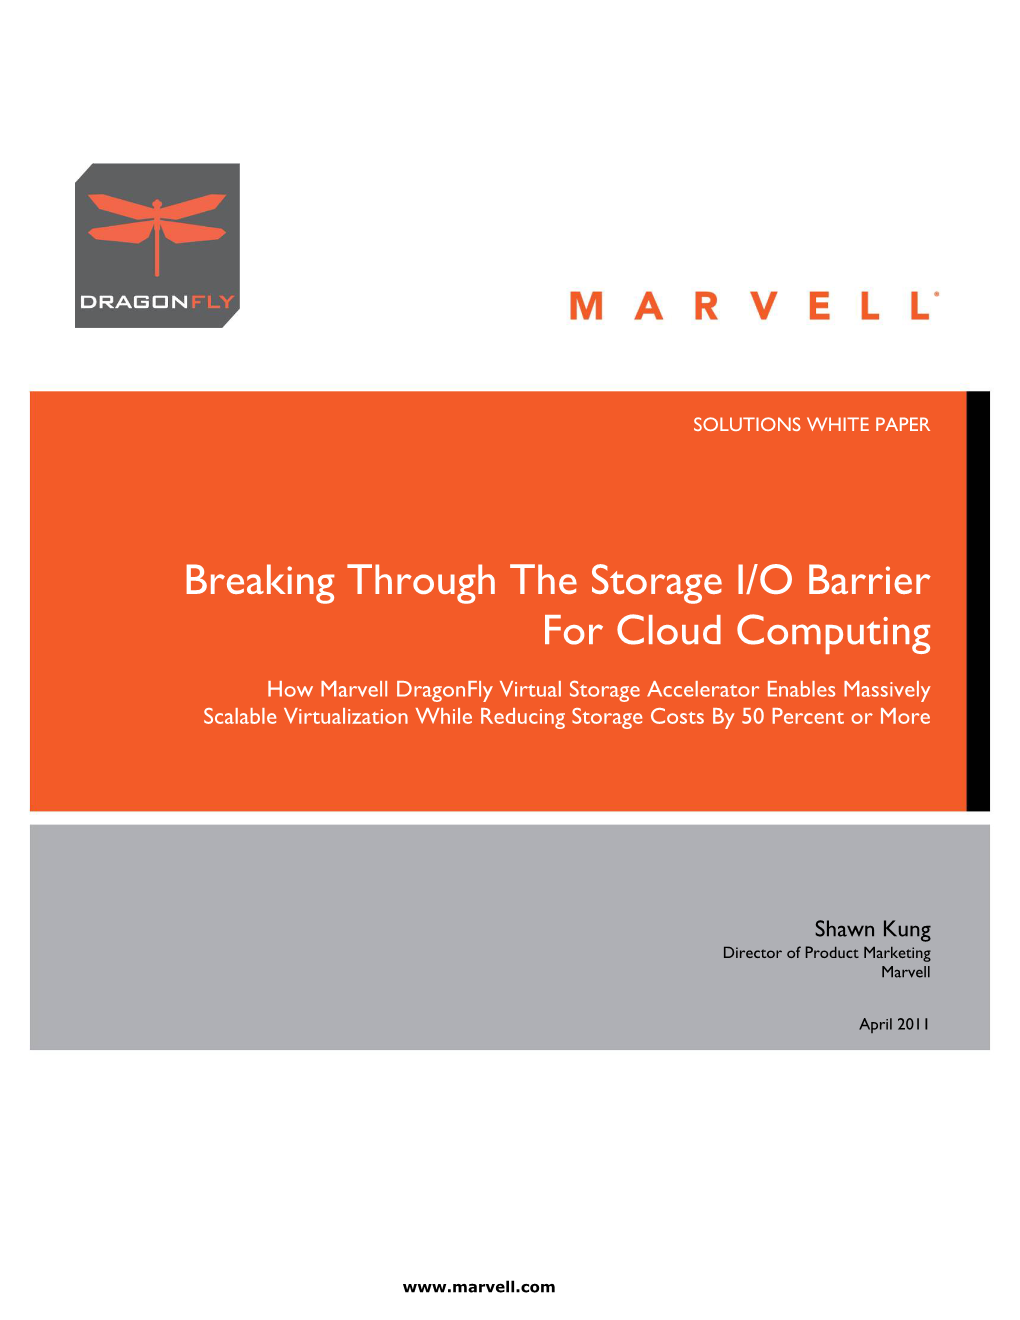 Breaking Through the Storage I/O Barrier for Cloud Computing